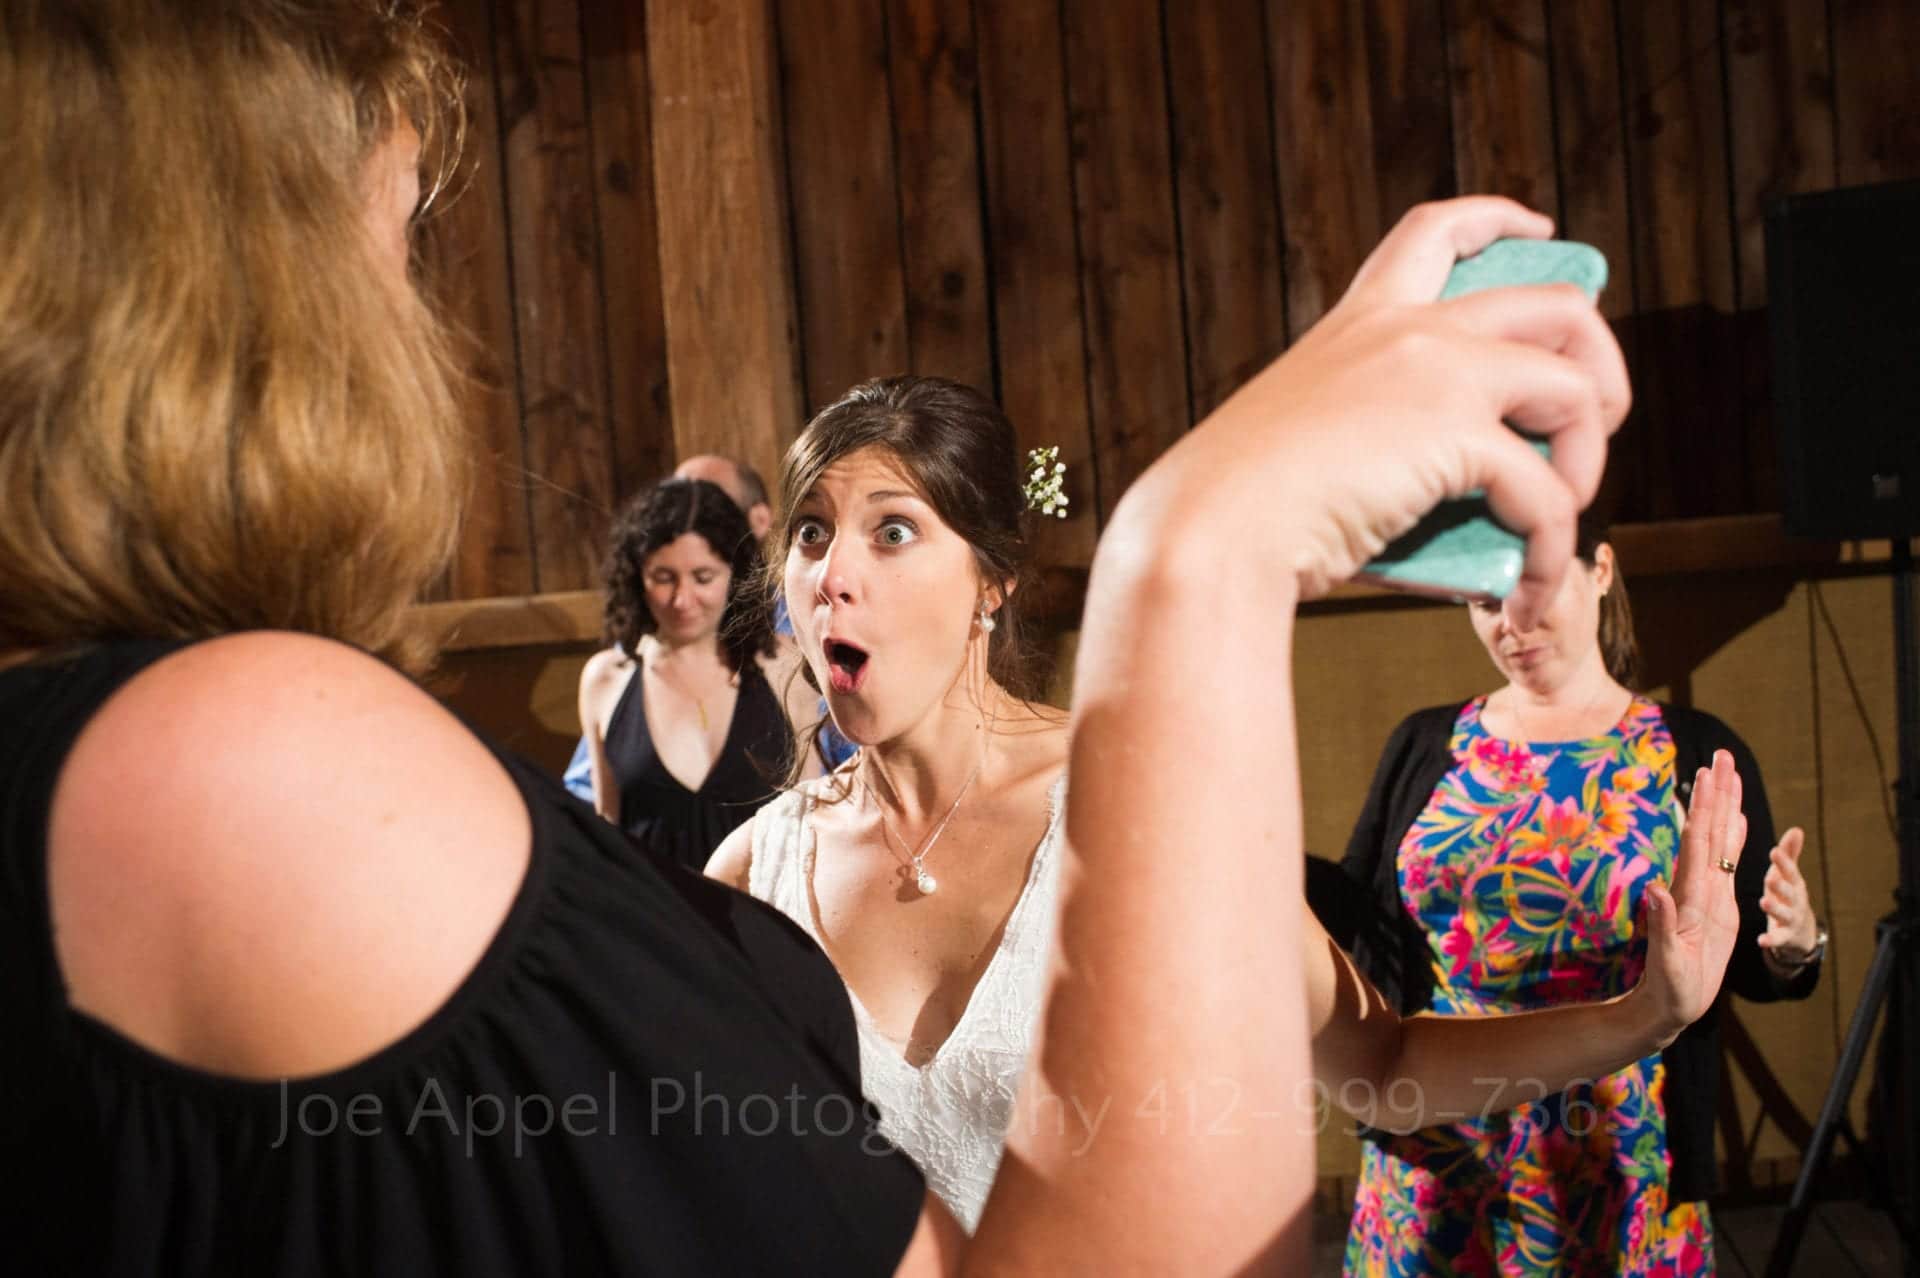 Seen through the outstretched arm of a woman wearing a bare shouldered dress, a bride makes a funny face while dancing.